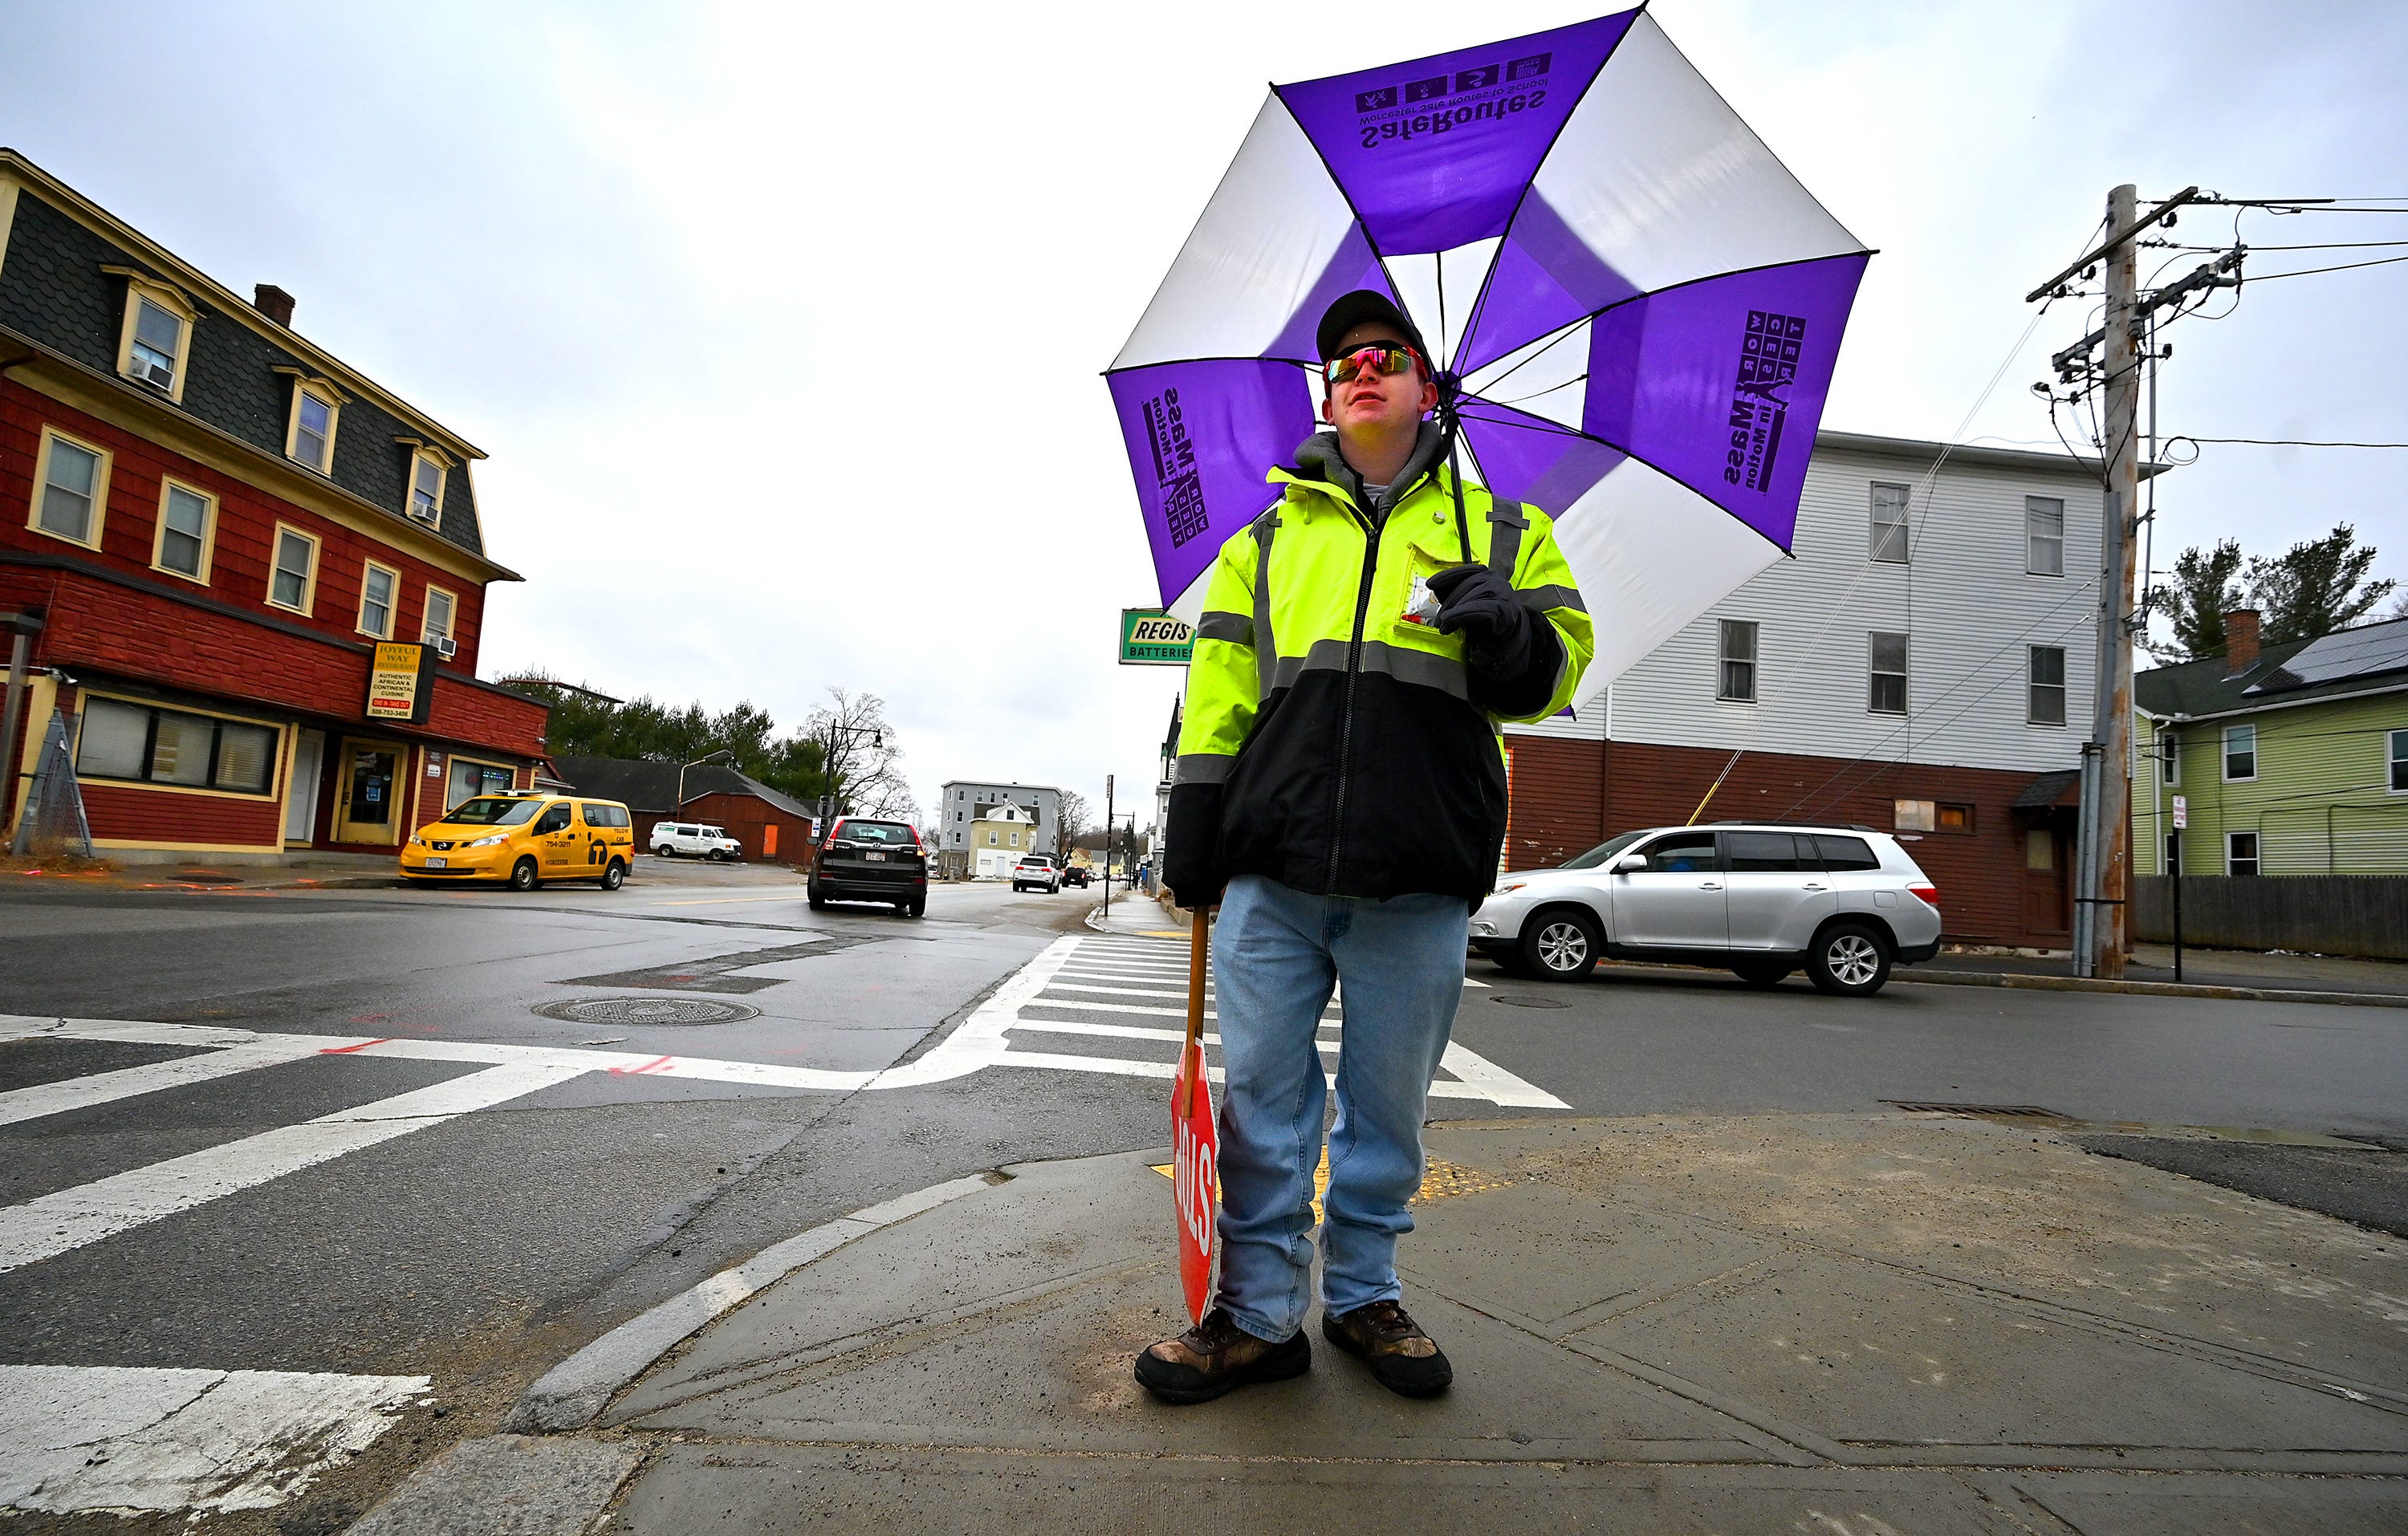 WORCESTER - As the nor'easter begins with bands of rain on Monday afternoon, school crossing guard Tyler Simoncini of Worcester waits for Quinsigamond School students to aid in crosssing Greenwood and Whipple streets.